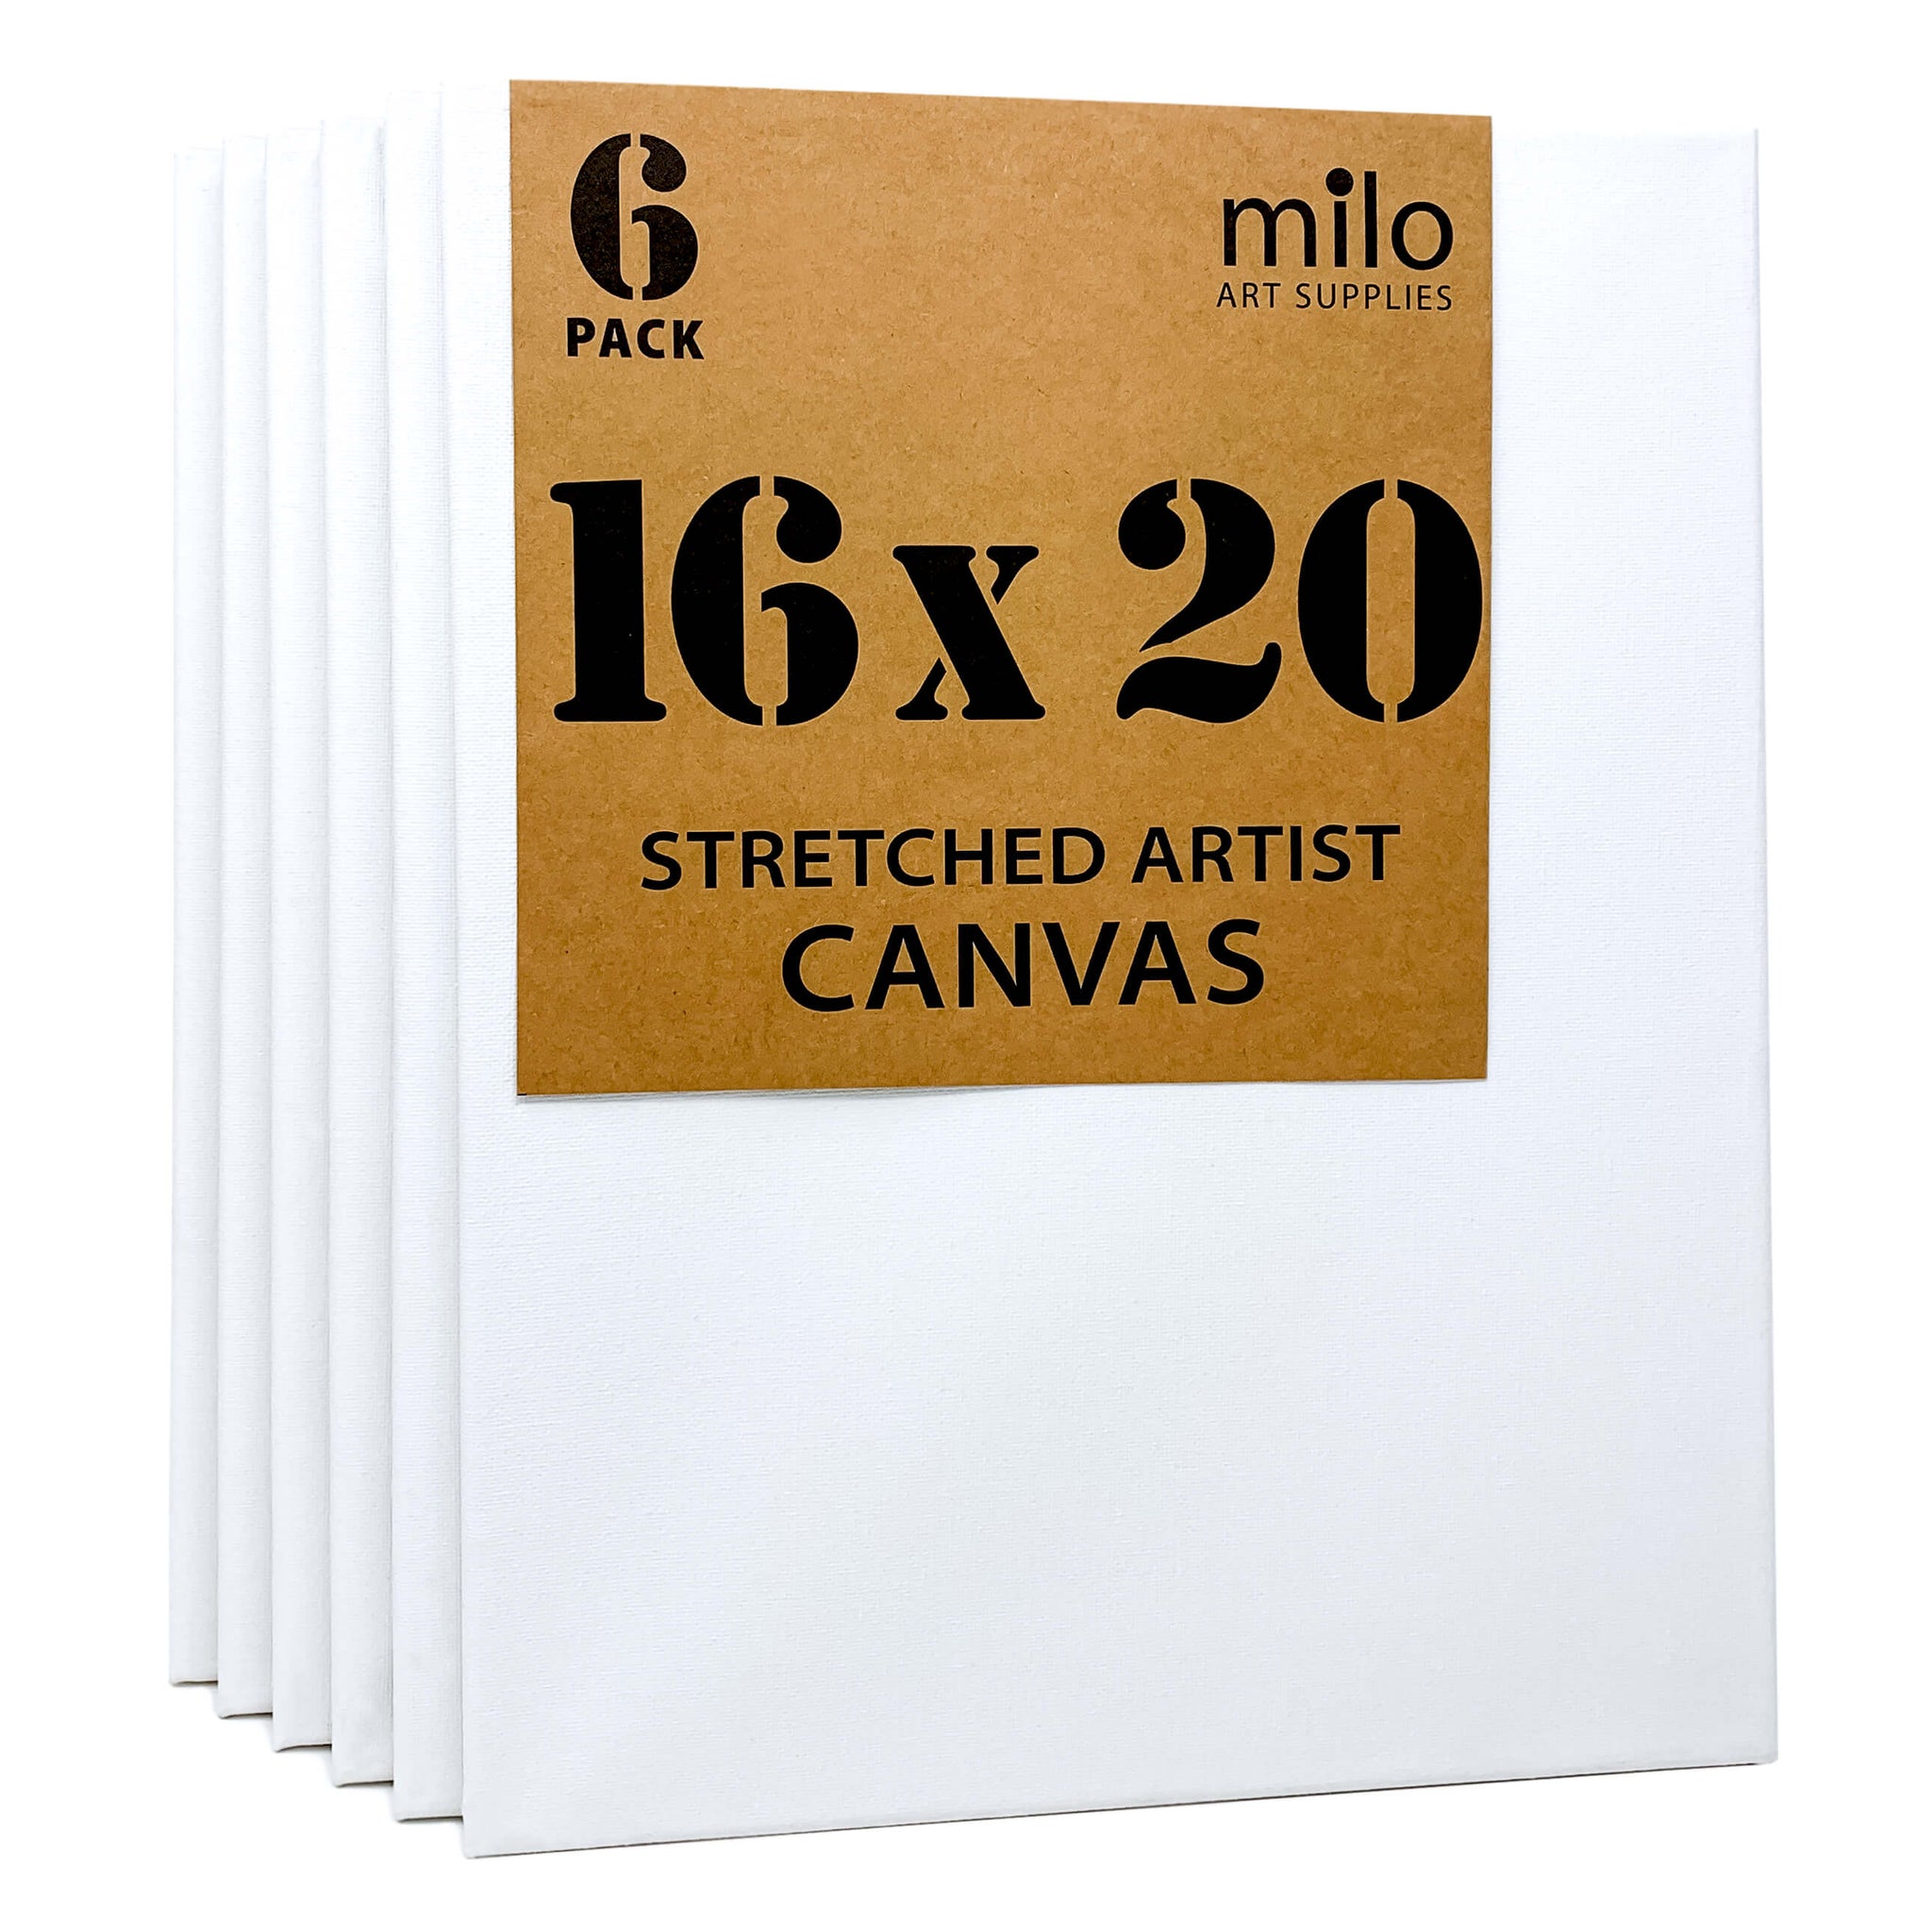 MILO  16 x 20 Pre Stretched Artist Canvas Value Pack of 6 Canvases – Milo  Art Supplies